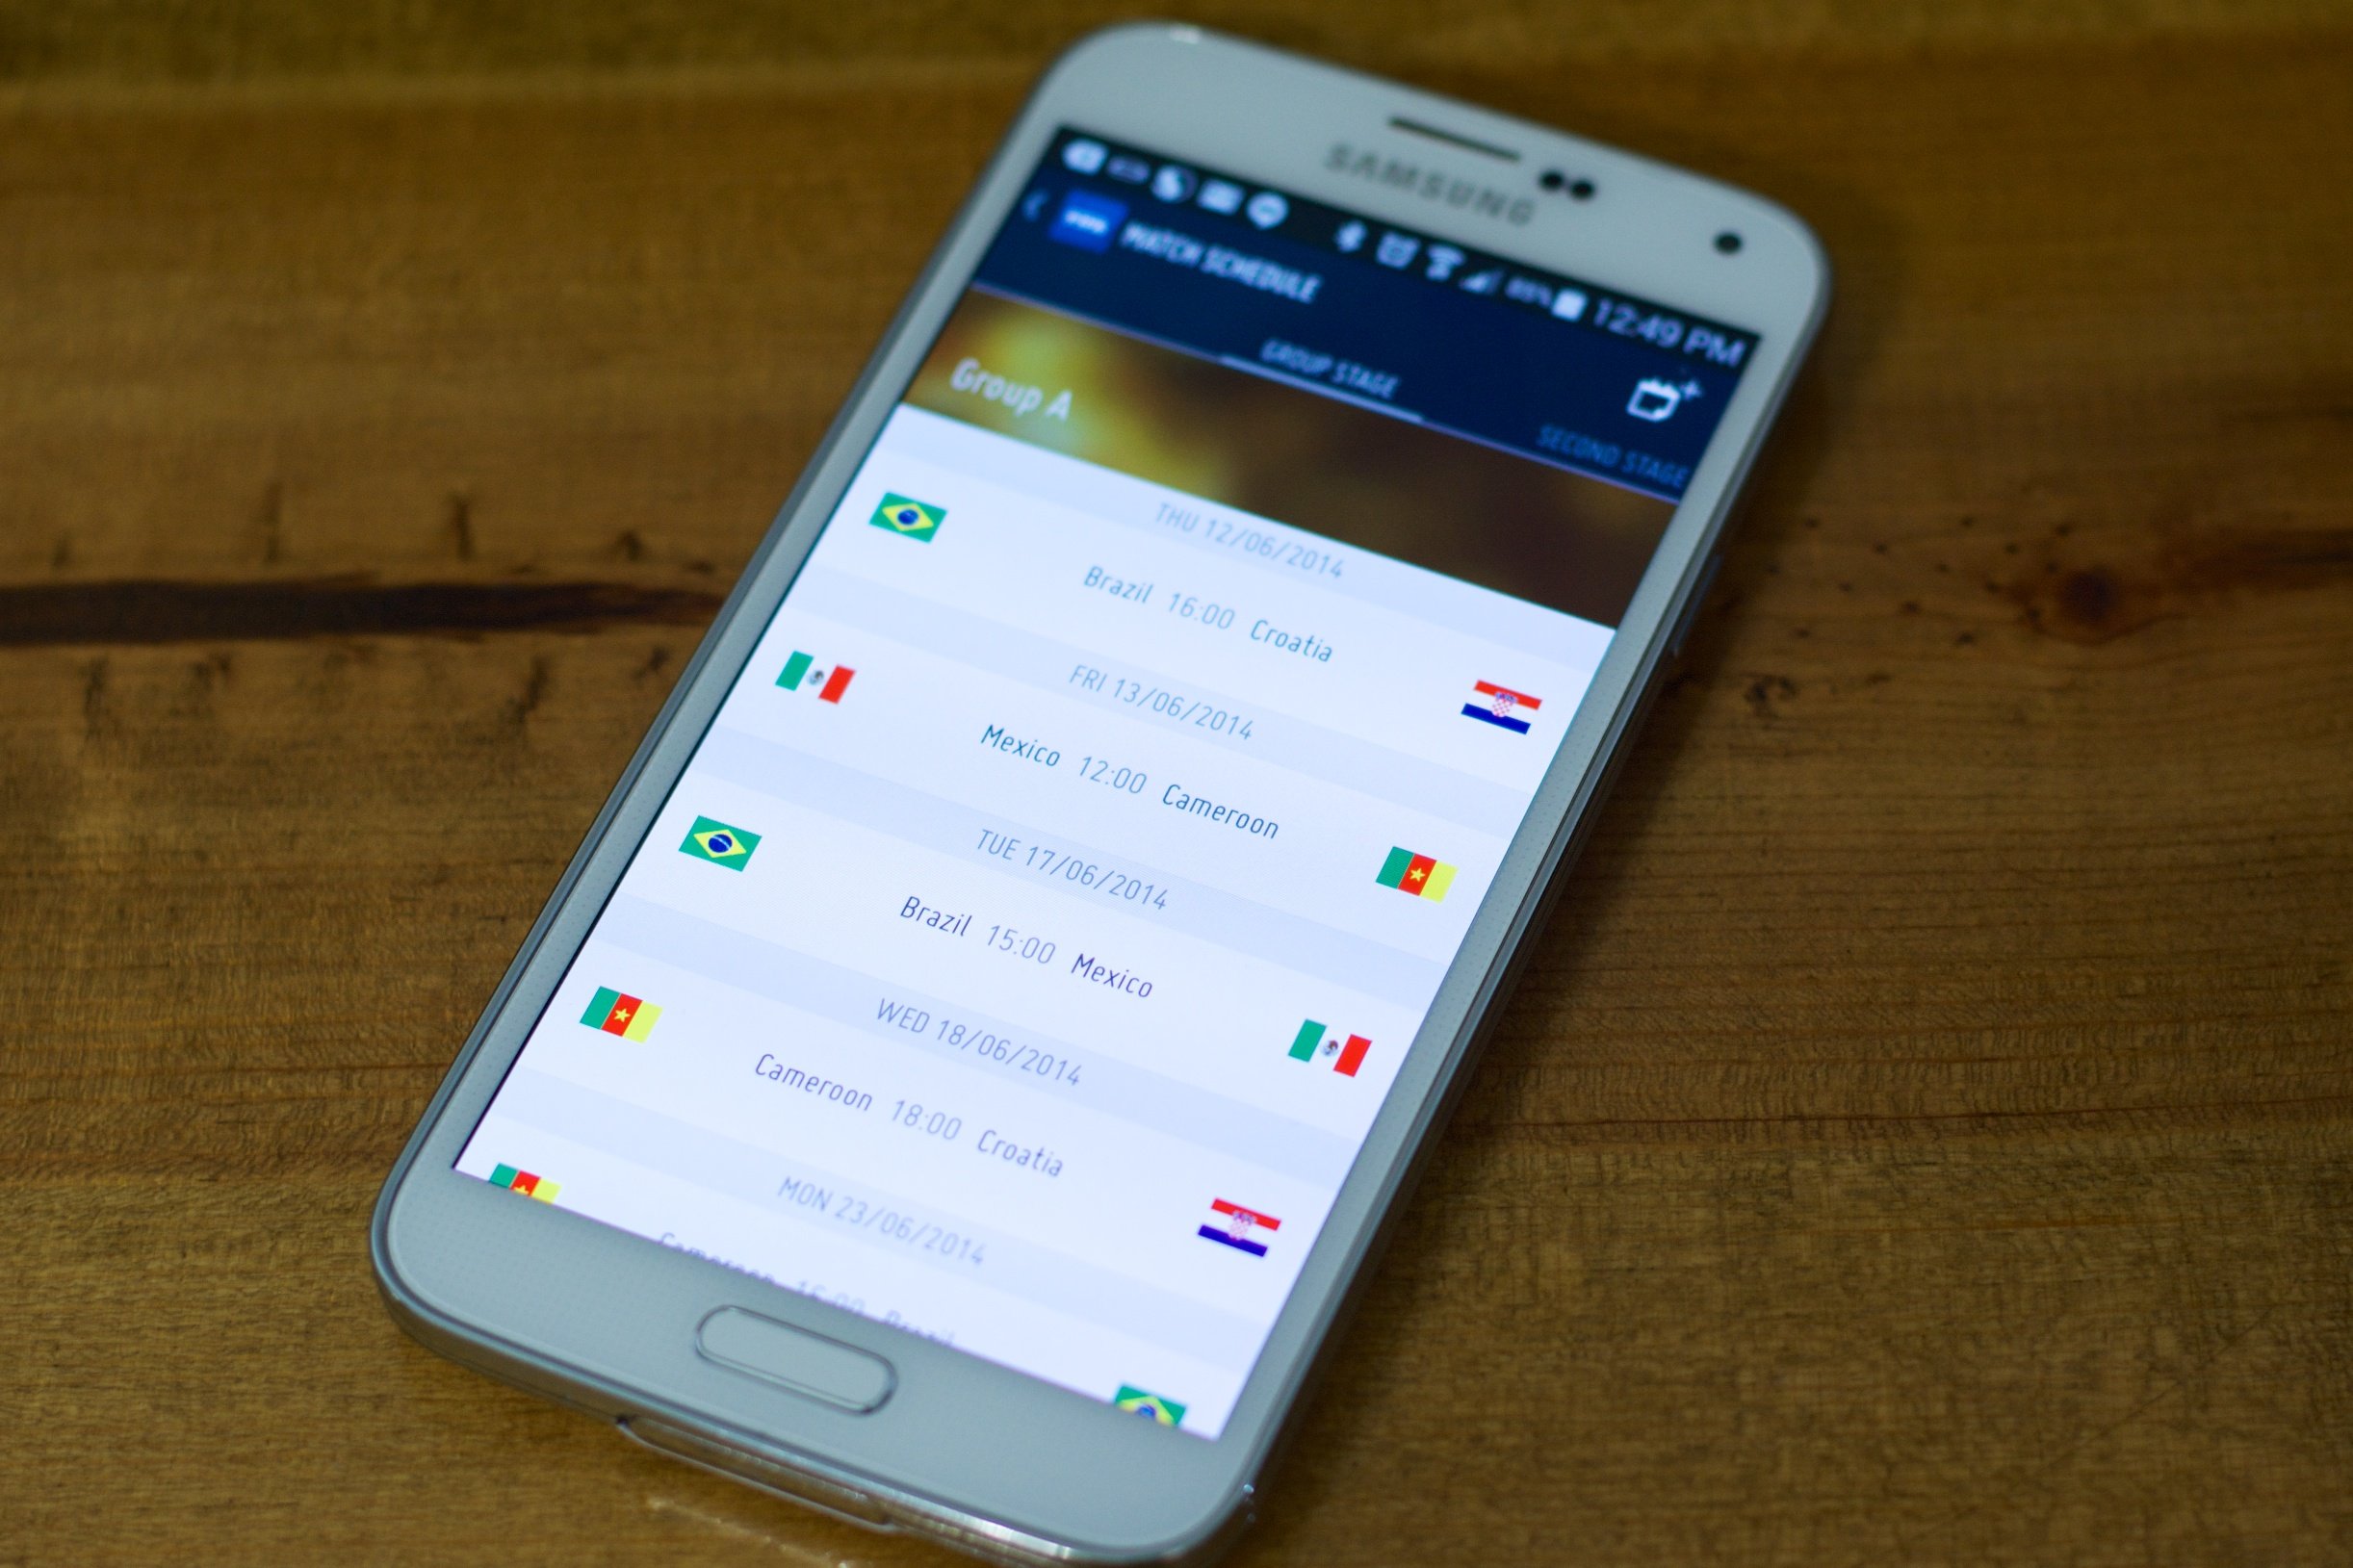 Here's how to watch the World Cup live, add the schedule to your phone and listen to radio broadcasts.